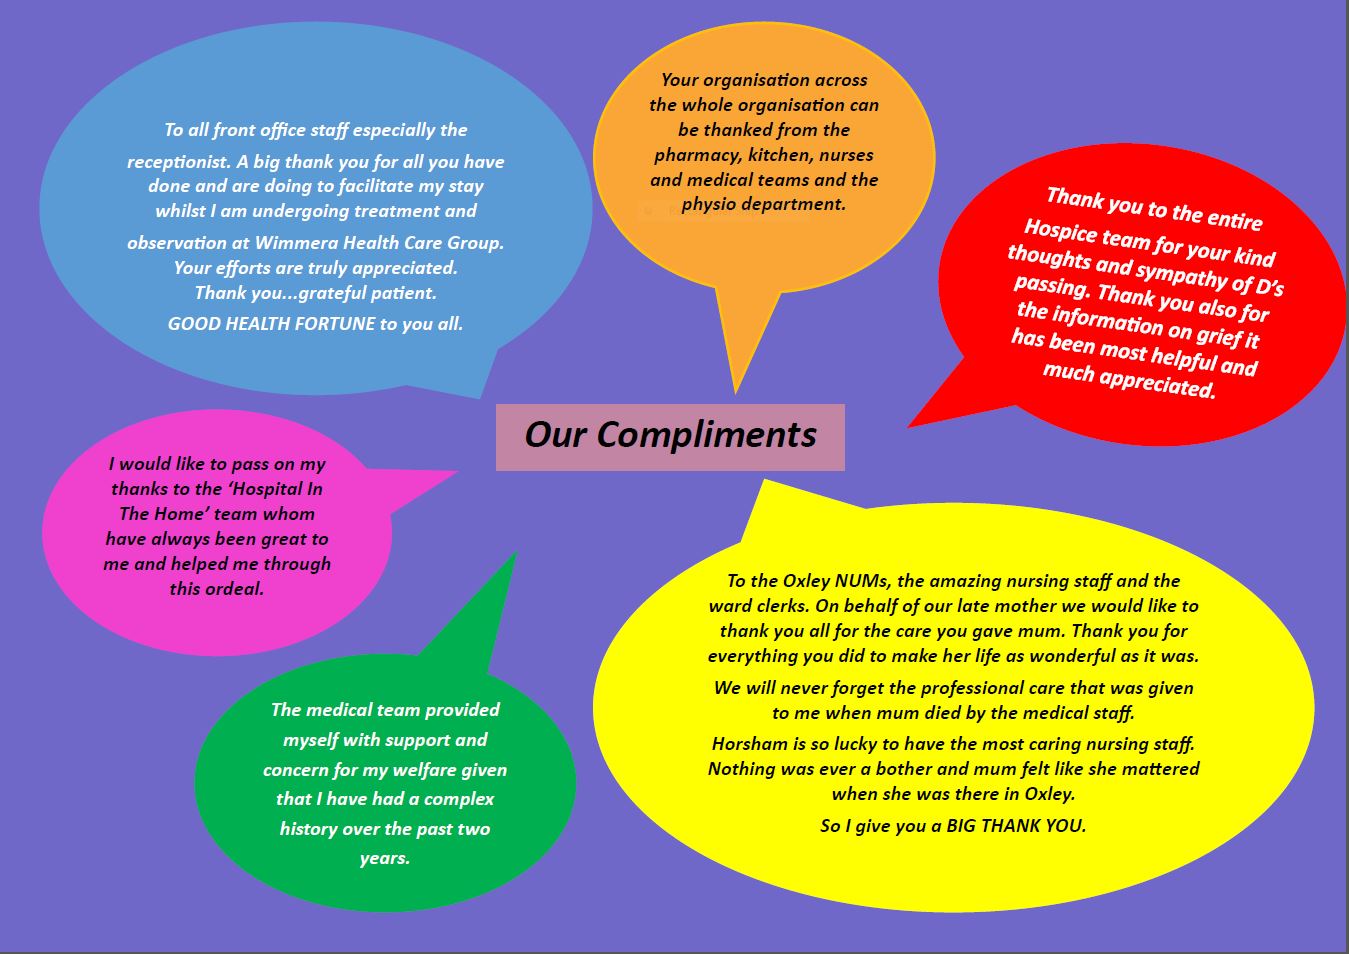 Our Compliments